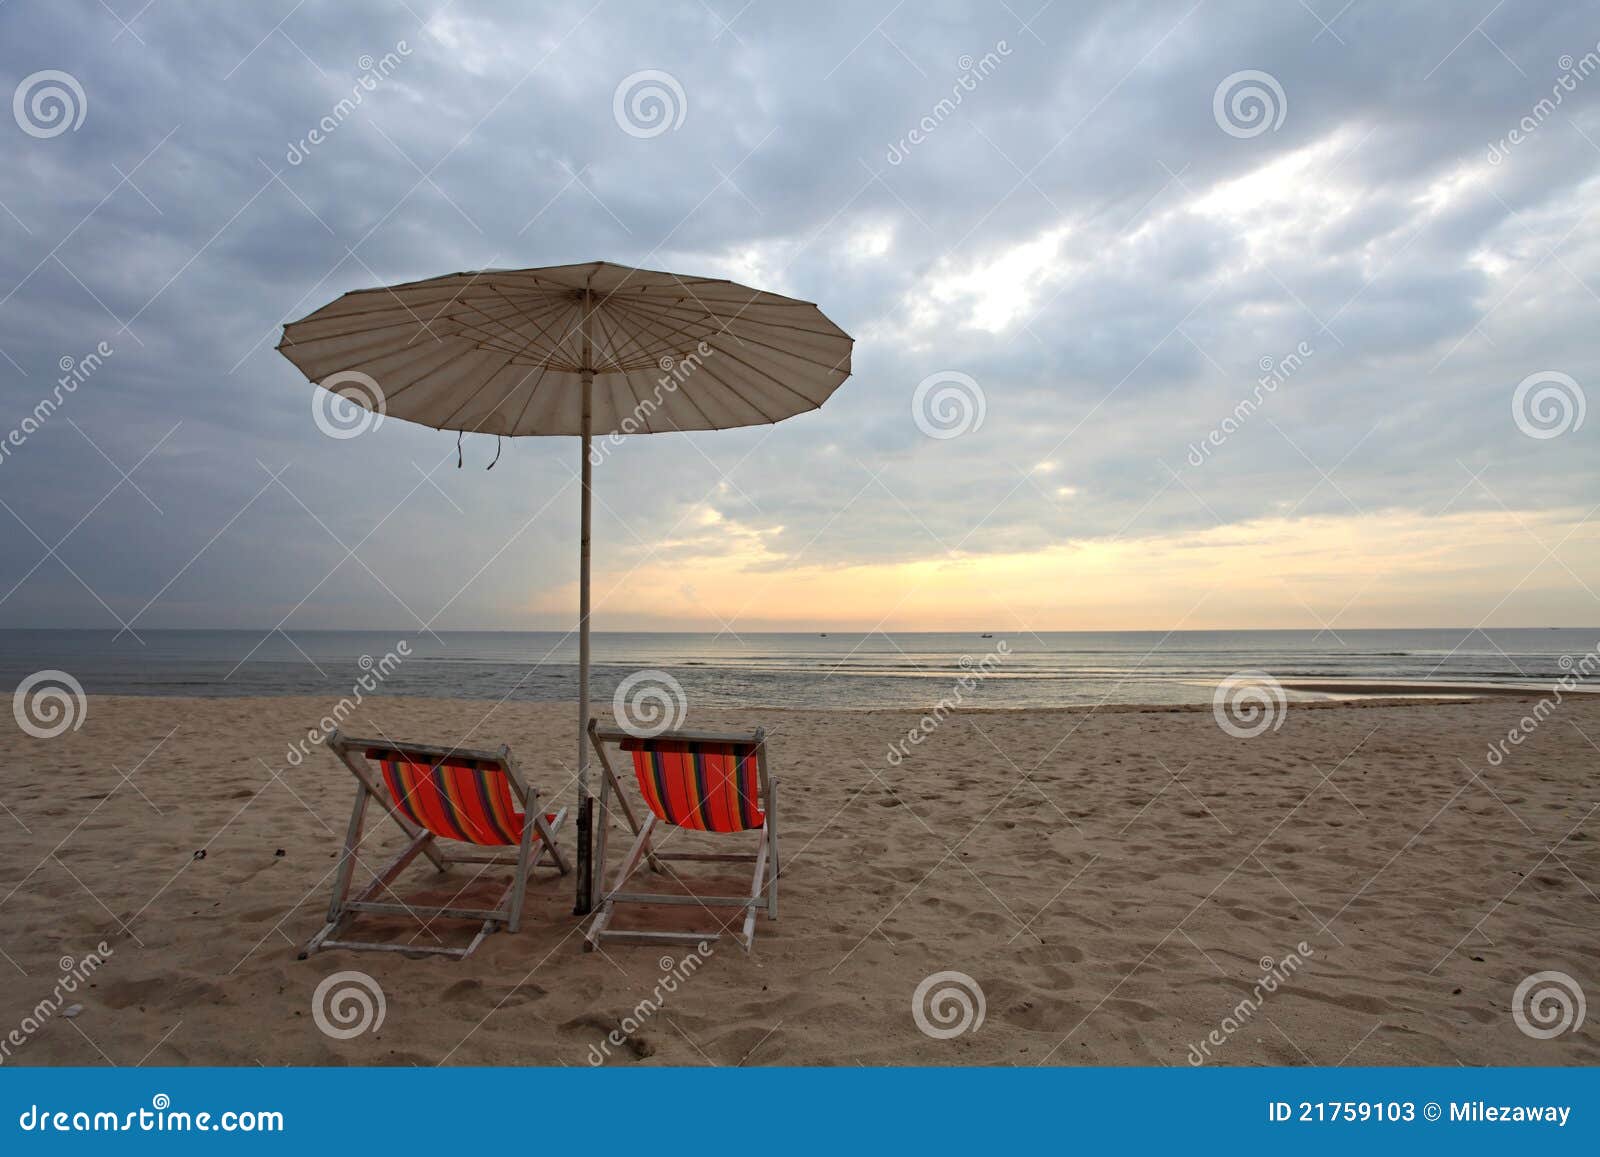 Beach chair and sea stock image. Image of island, relax - 21759103